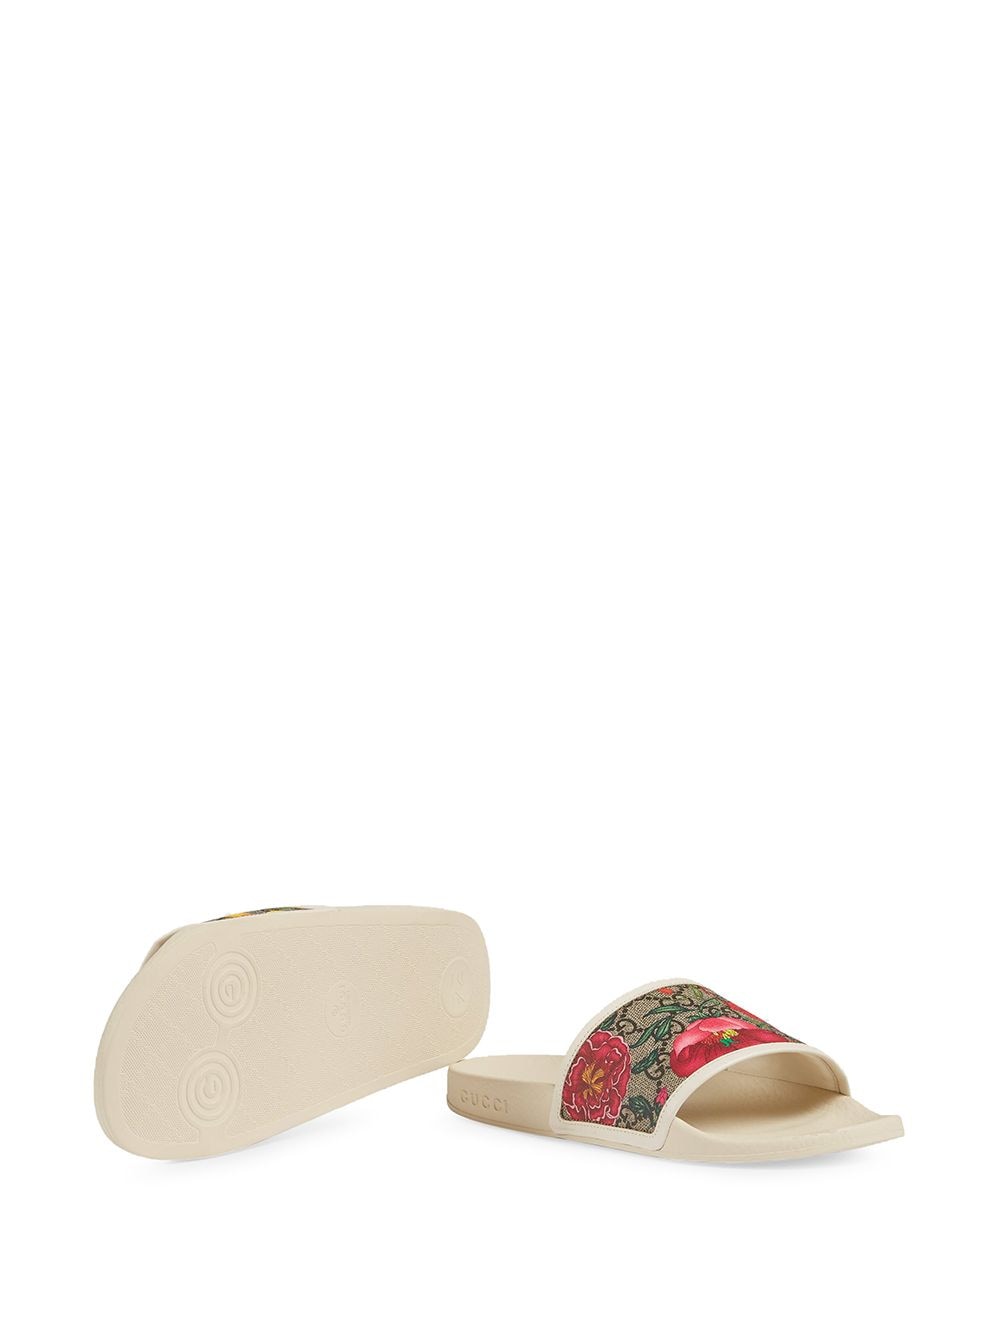 Shop white Gucci GG Flora pattern slides with Express Delivery - Farfetch